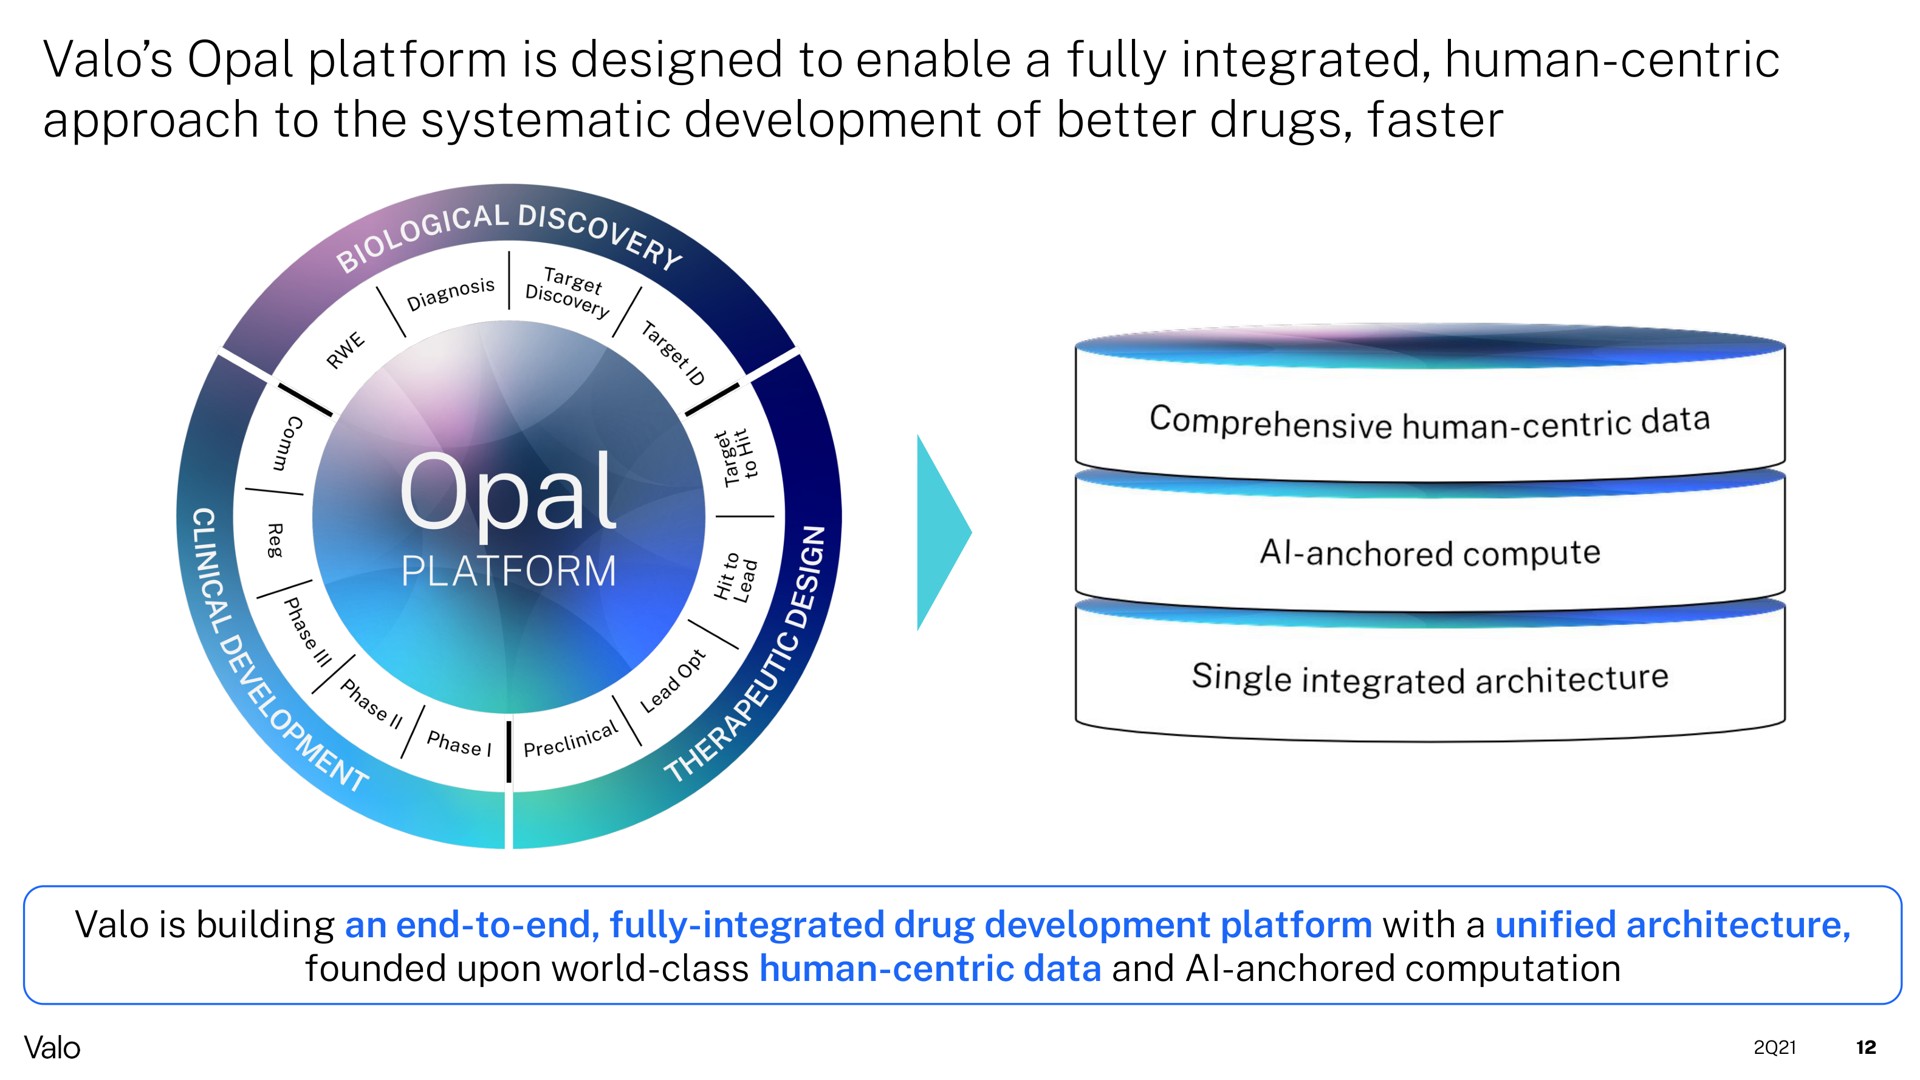 opal platform is designed to enable a fully integrated human centric approach to the systematic development of better drugs faster | Valo